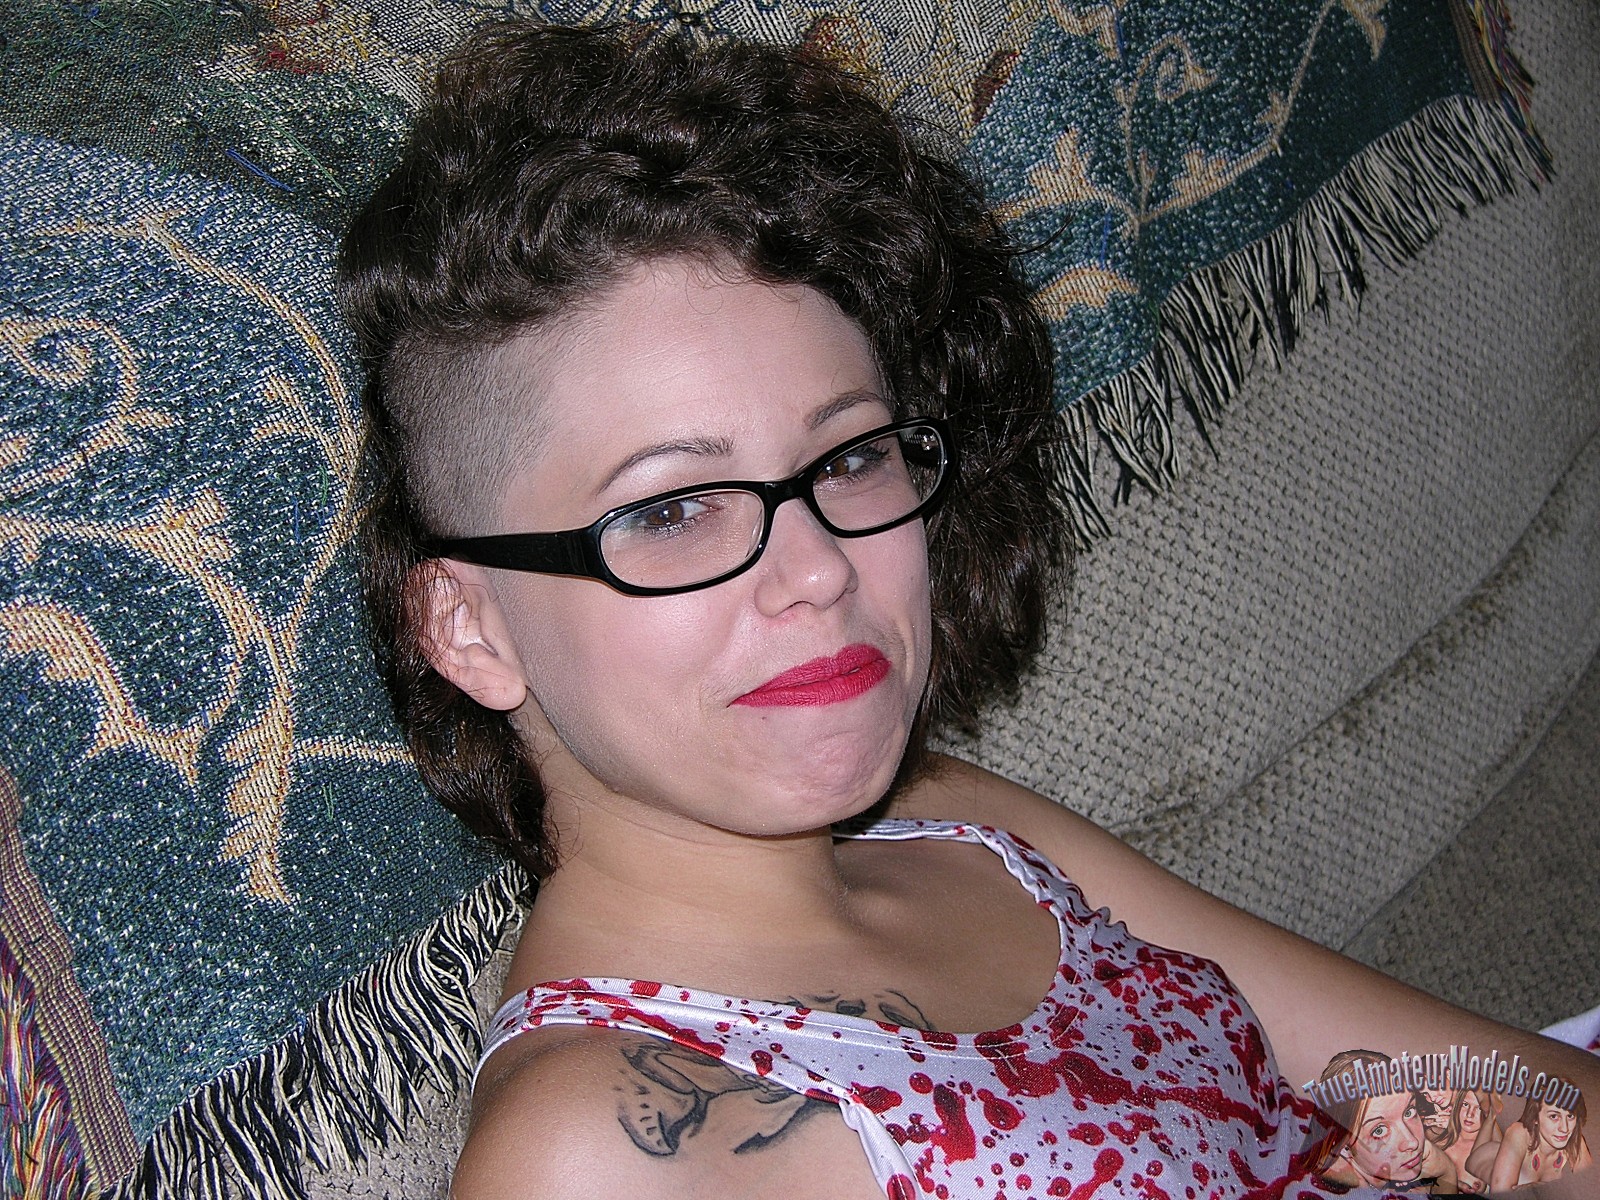 wpid-petite-punk-rawk-chick-bailey-spreading-her-fat-pussy-lips2.jpg